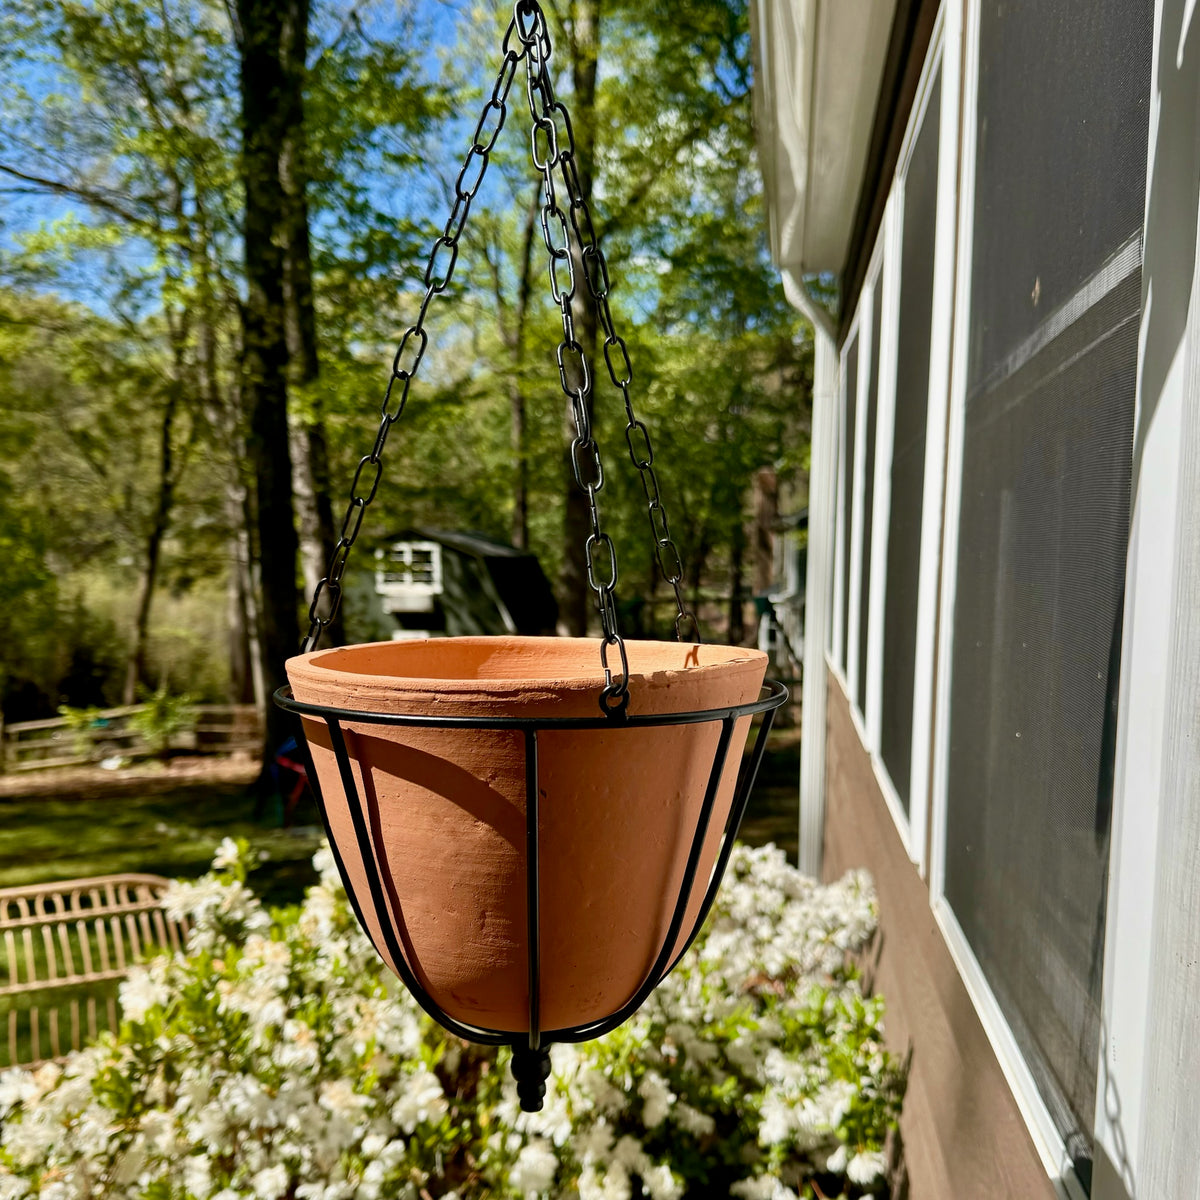 Hanging Terracotta Planter with Metal Cage - Large - Holistic Habitat 